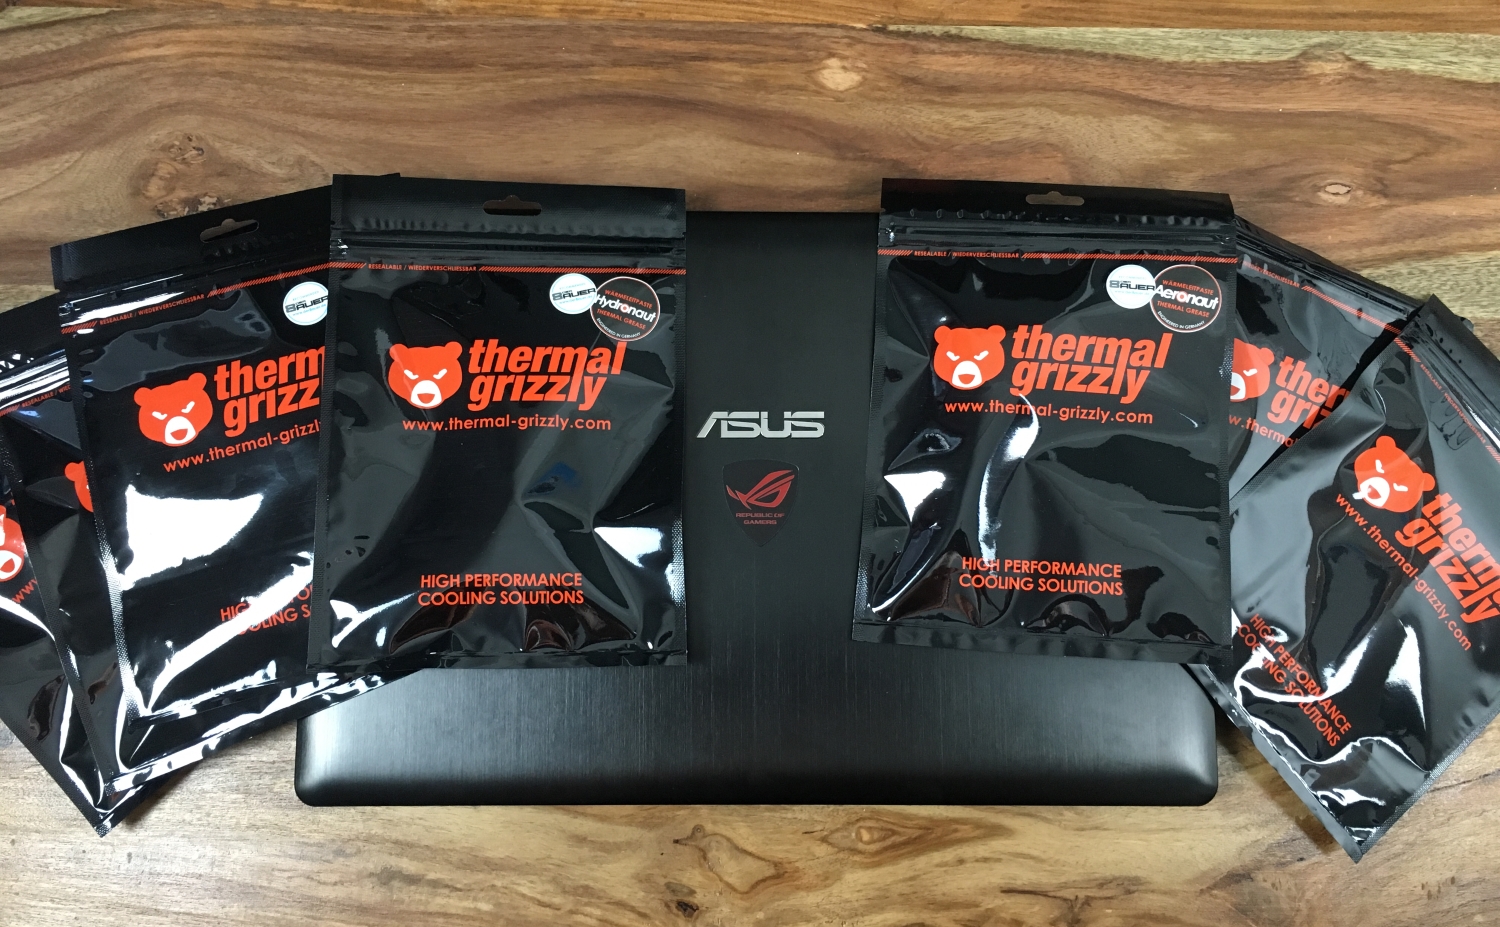 ASUS G501JW Thermal Grizzly (19)